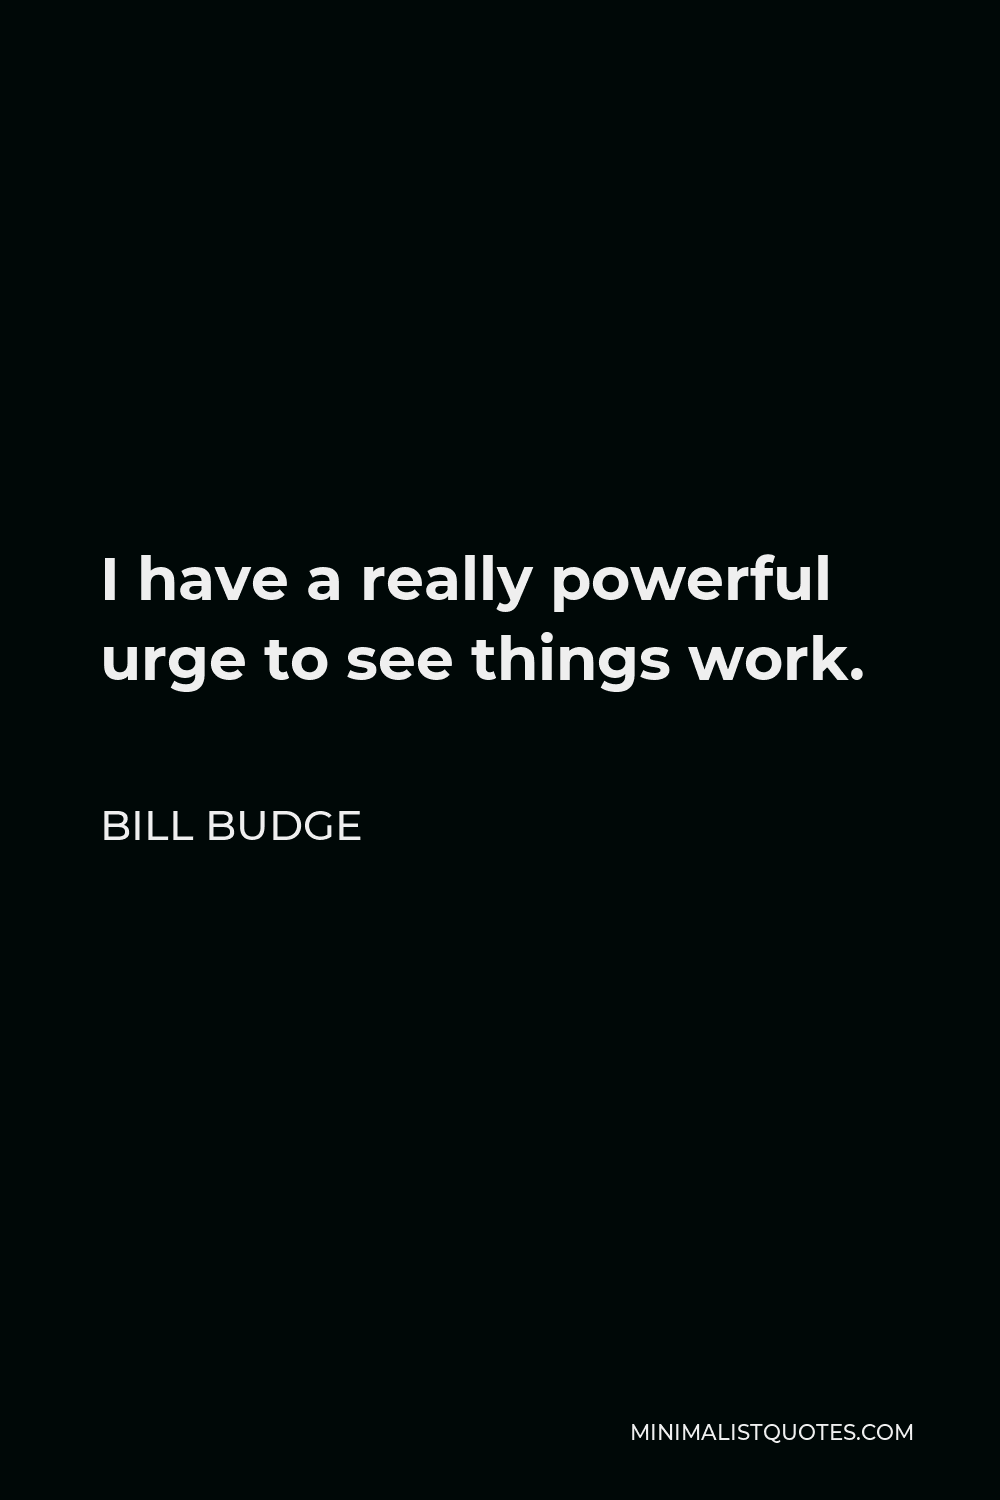 Bill Budge Quote - I have a really powerful urge to see things work.